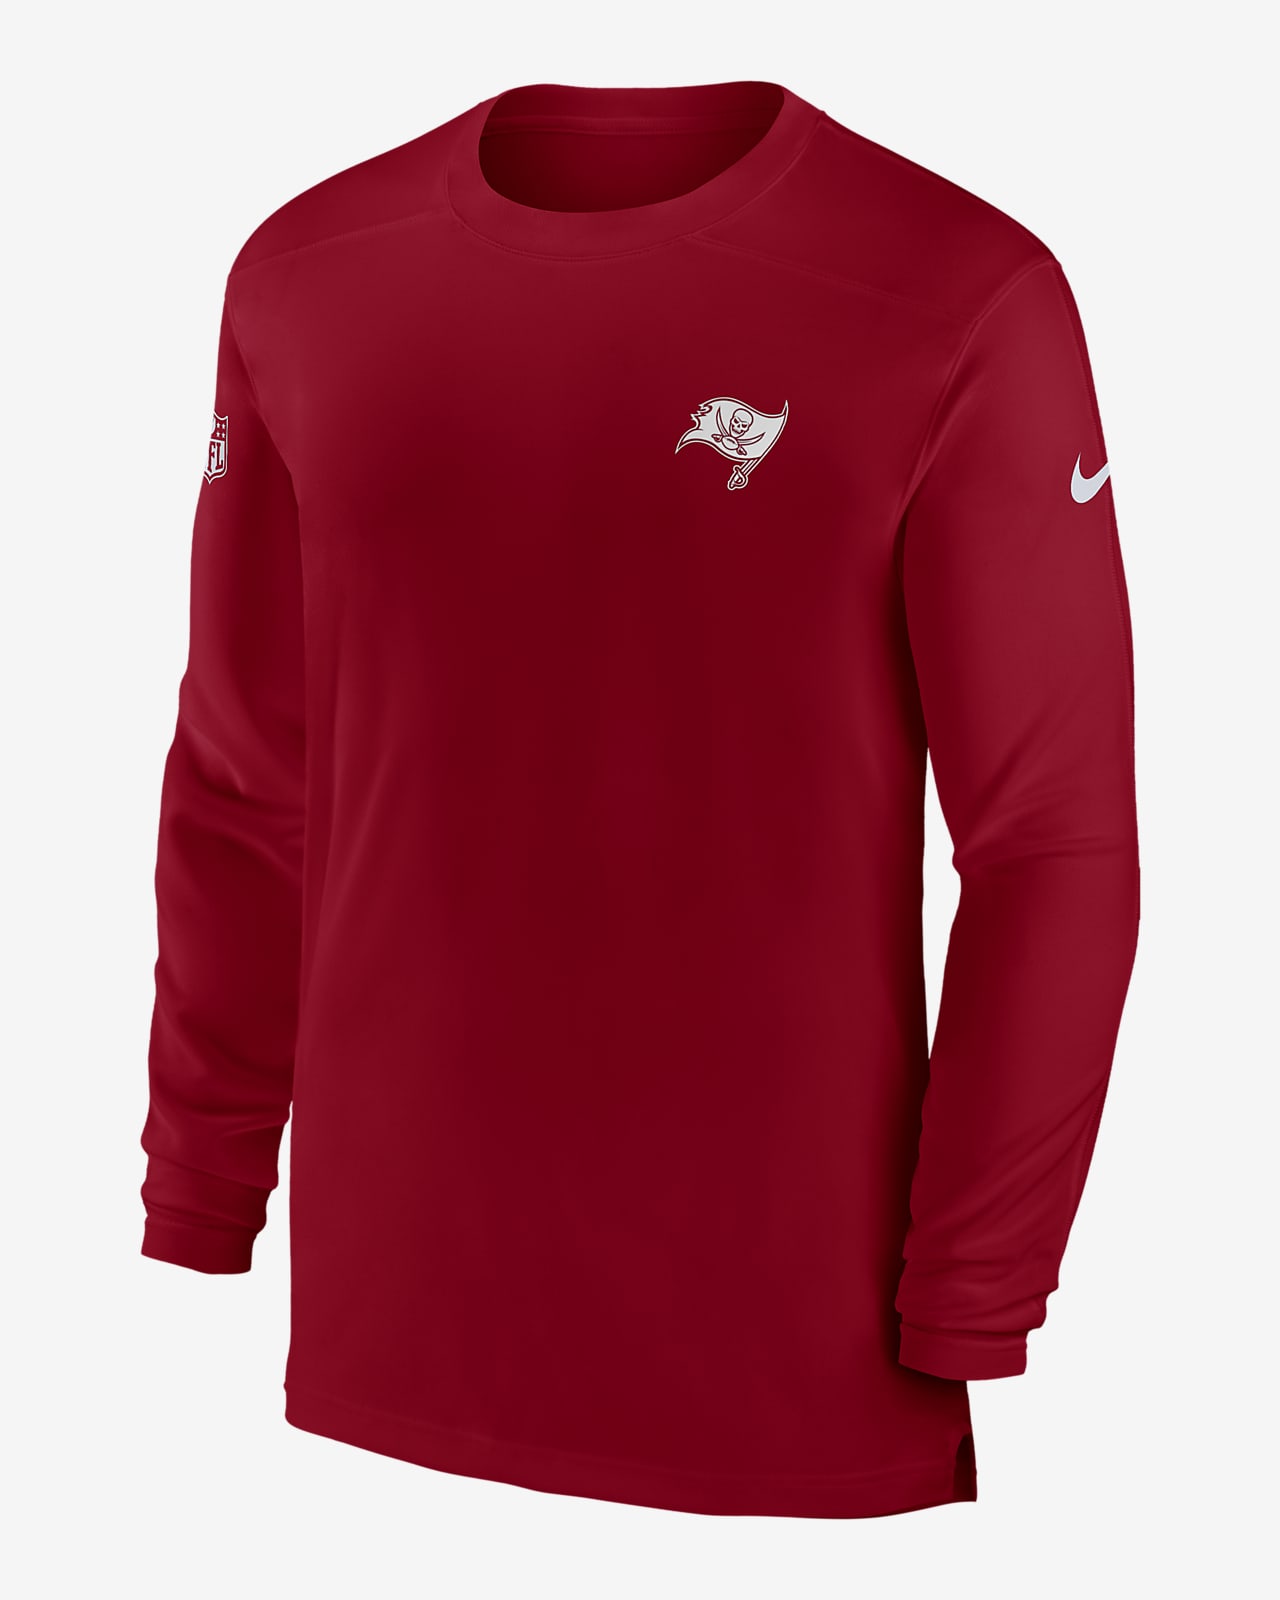 Tampa Bay Buccaneers Nike Sideline Coaches T-Shirt - Mens